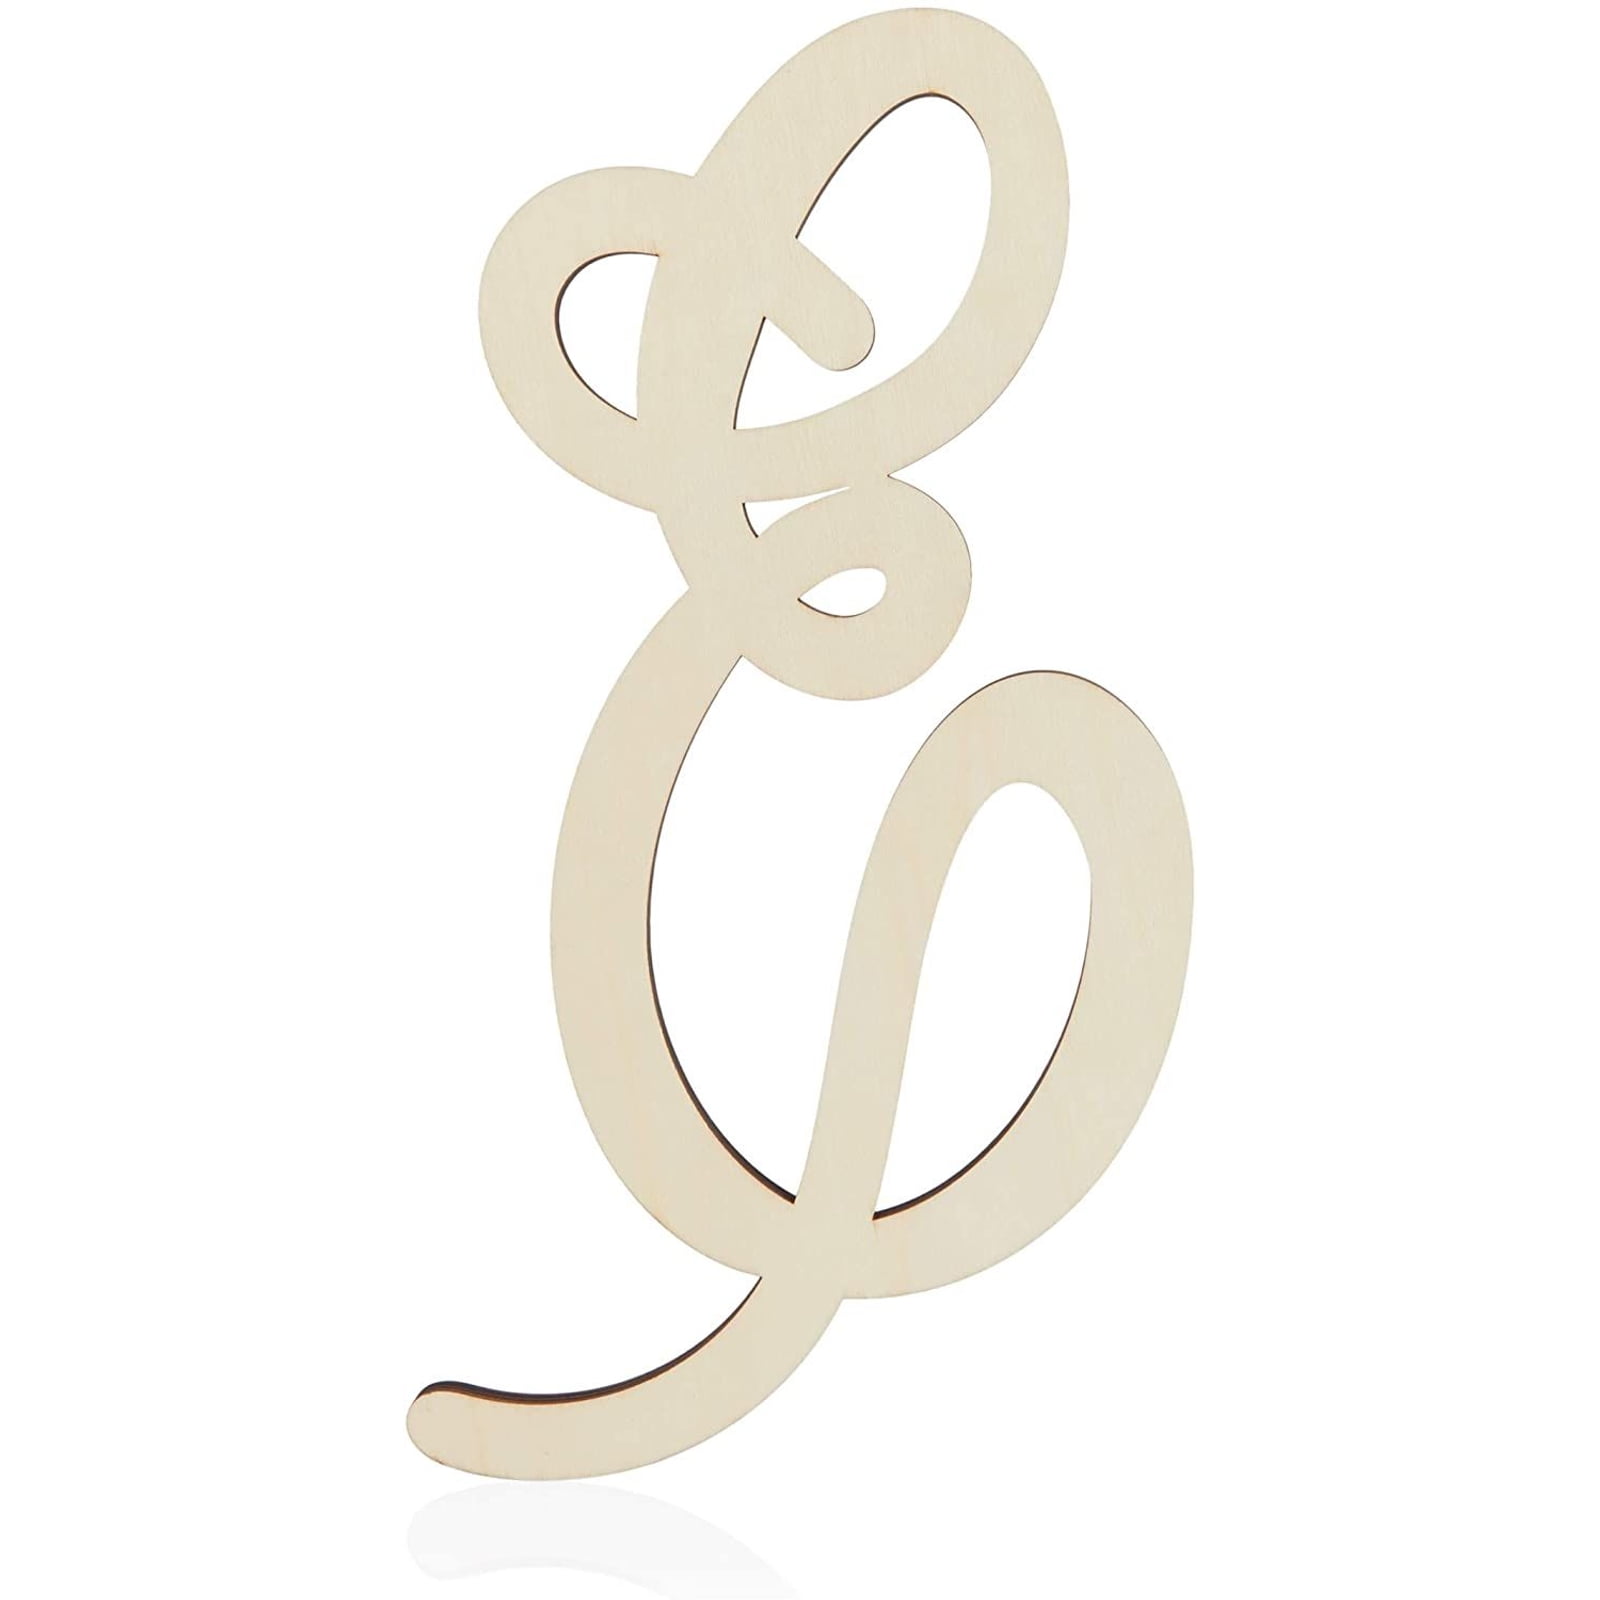 Letter S Wedding 13 in Nursery Unfinished Calligraphy Vine Monogram Wood Letter Wall Decor Alphabet for Birthday Baby Shower S for Your DIY Decor Such as Door Hanger 